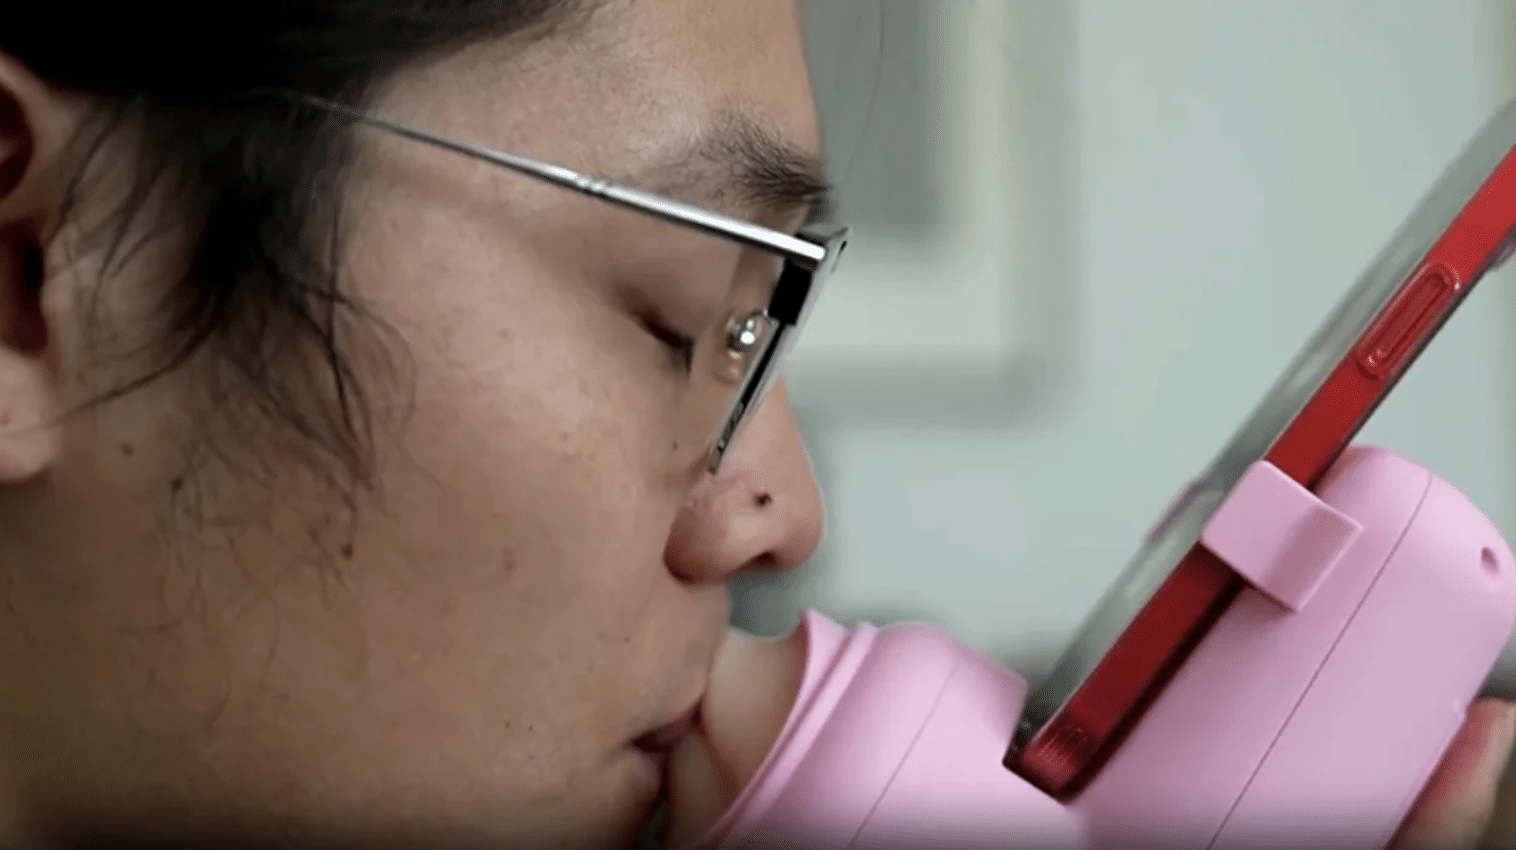 (WATCH) Chinese company creates kissing machine’ to keep people ‘in touch’ online, gets over 20,000 orders